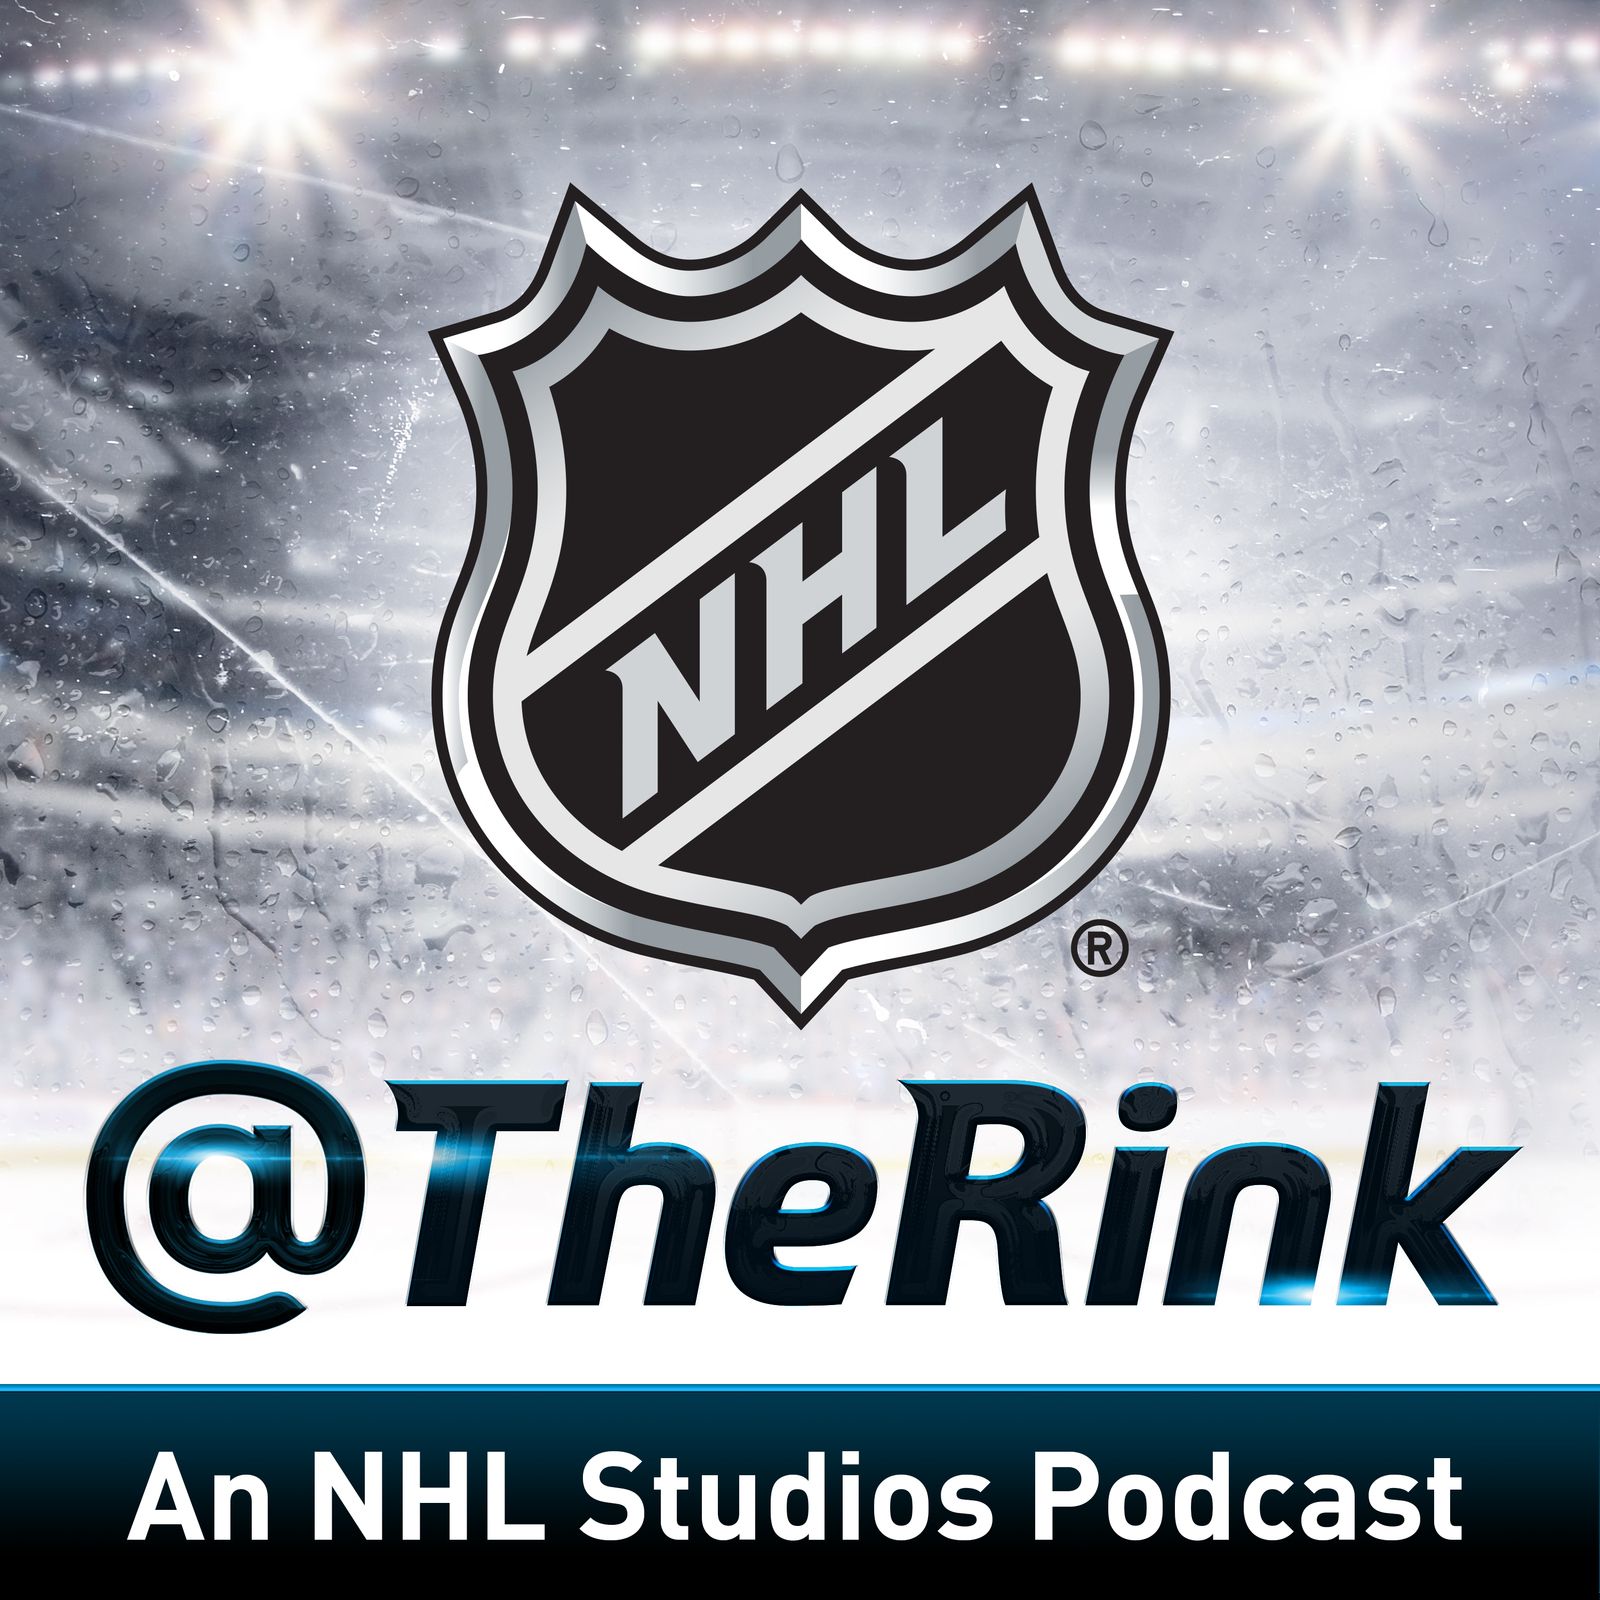 Brady & Matt Tkachuk join; McDavid's point ceiling, Senators on rise, Zegras & Drysdale : Dan and Shawn are joined by Brady Tkachuk (16:04) and Matthew Tkachuk (40:30). Brady talks about his summer wedding, his excitement going into this season, the growth of his team and what he learned watching Matthew and the Panthers go on their run to the Stanley Cup Final last season. Matthew discussed the injury he sustained in the Stanley Cup Final and the pain he was in, the help he got from his brother in that time, but also Brady's bachelor party in Miami, and feeling a different vibe in the South Florida market after last season. Rosen and Roarke talked about the positive impact of the recently completed 2023 NHL Global Series -- Melbourne (2:00). They talked about the Senators and Panthers, and if the Tkachuk teams have what it takes to make the Stanley Cup Playoffs this season (9:00). They also gave opinions on Sidney Crosby's take that Connor McDavid could score 170 points in a season, and why that might not be a good thing for the Edmonton Oilers (32:00). And they offered some thoughts on the contract stalemate between the Anaheim Ducks and their two remaining restricted free agents, center Trevor Zegras and defen